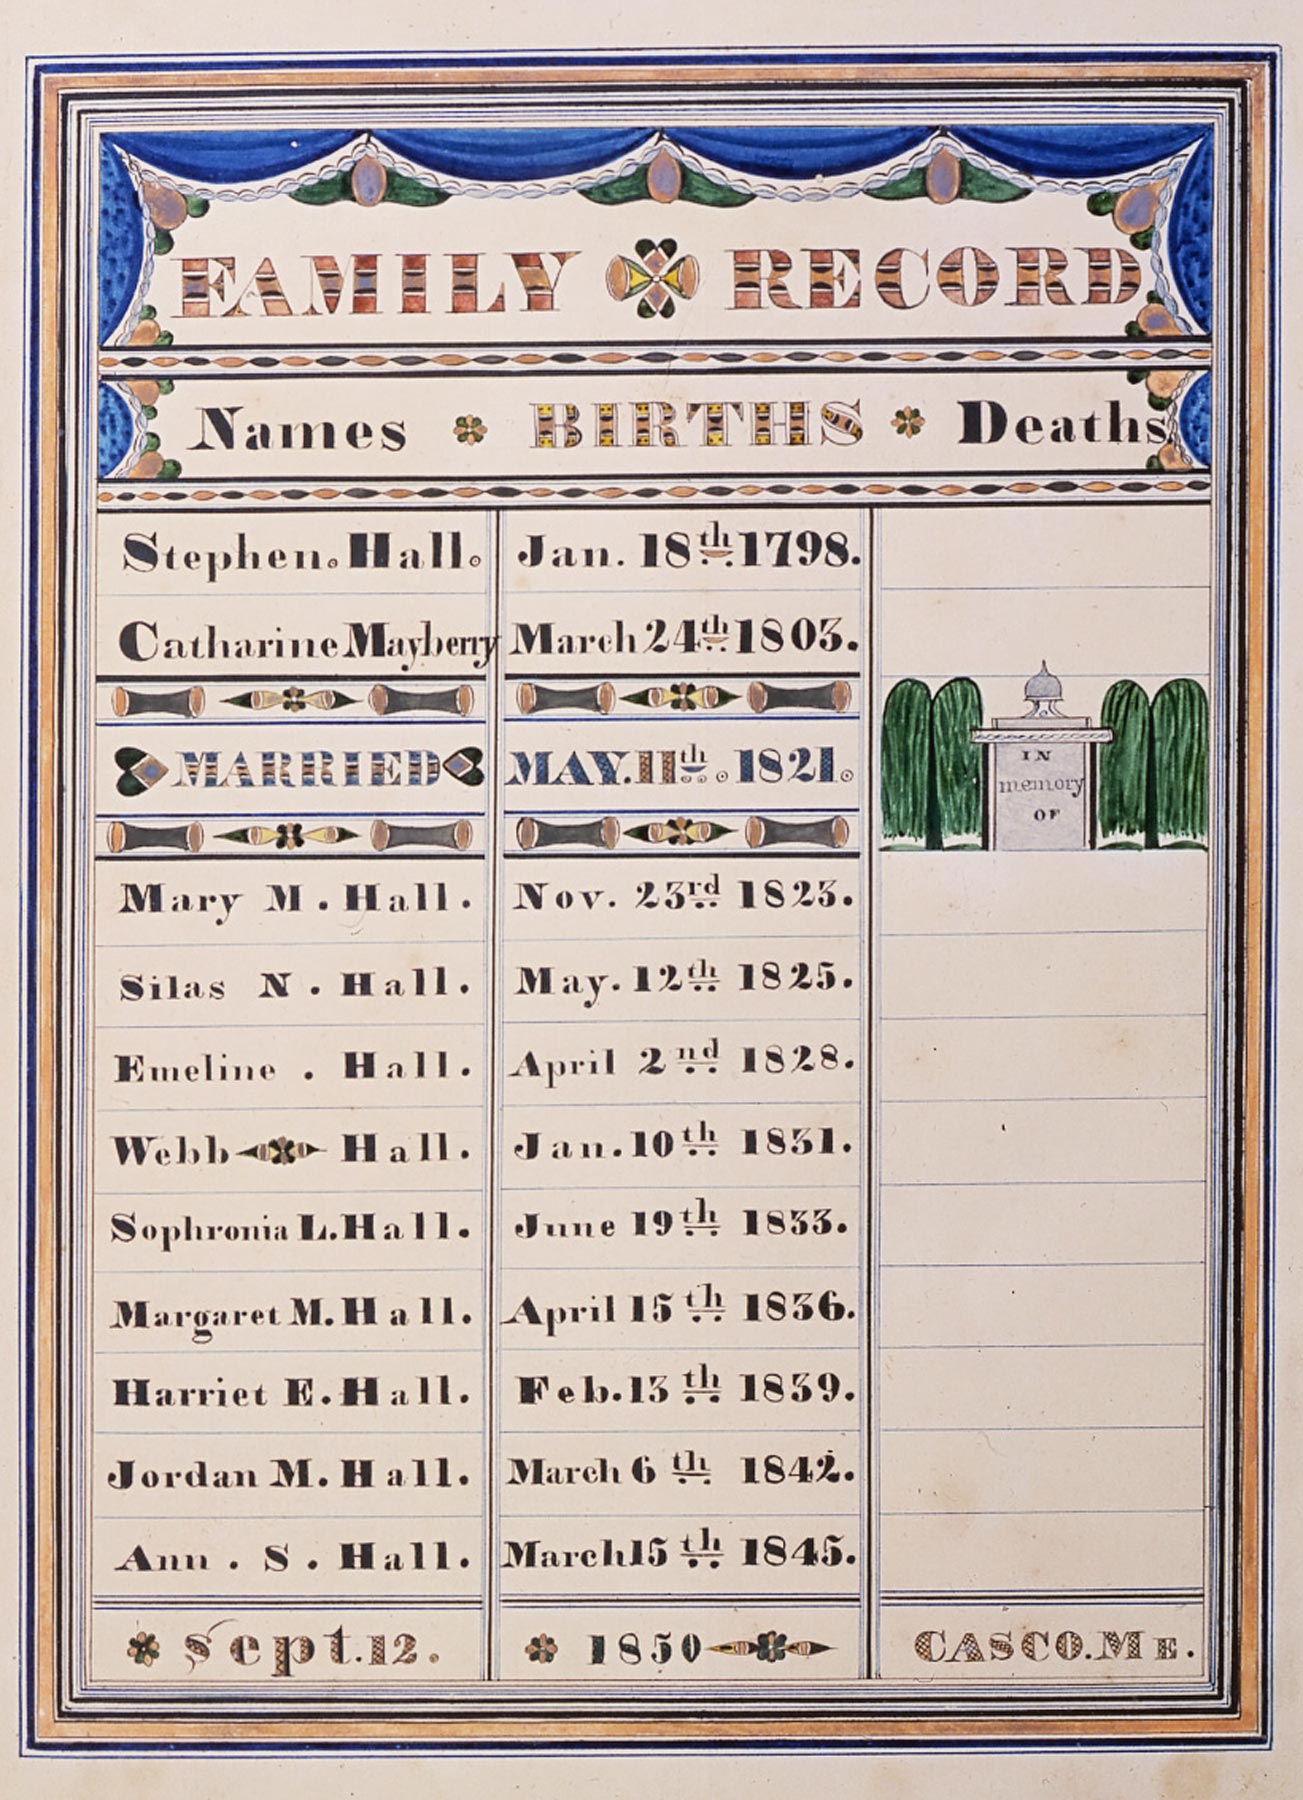 Stephen Hall – Catherine Mayberry Family Record, Casco, Maine, 1850